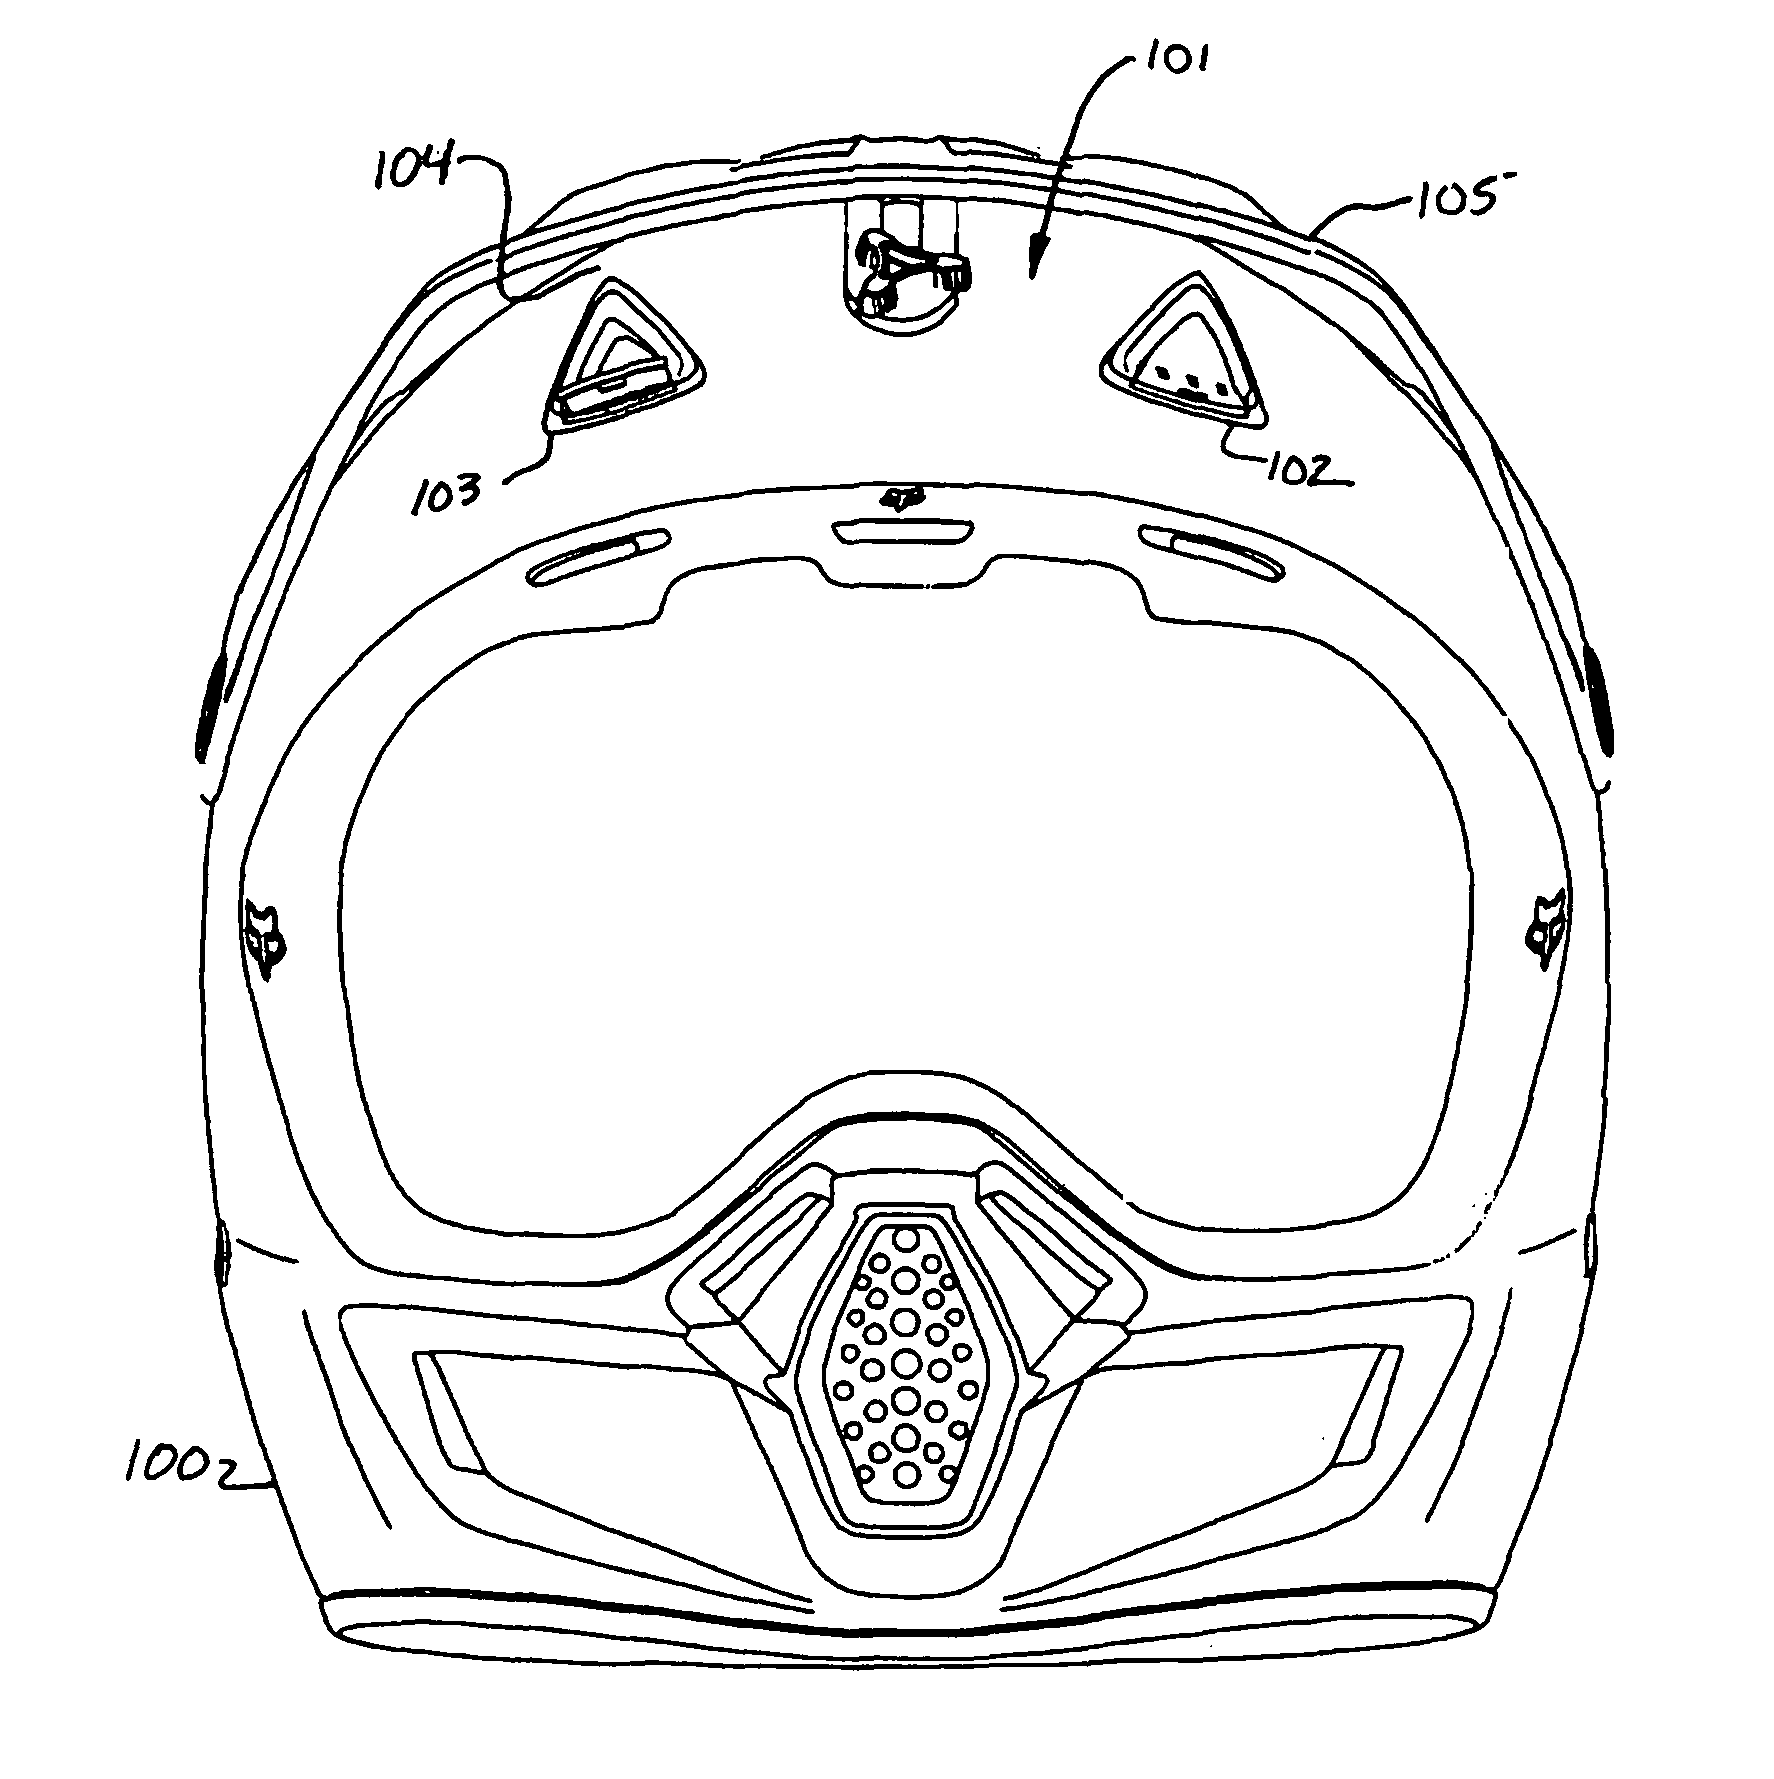 Low profile helmet vents and venting system